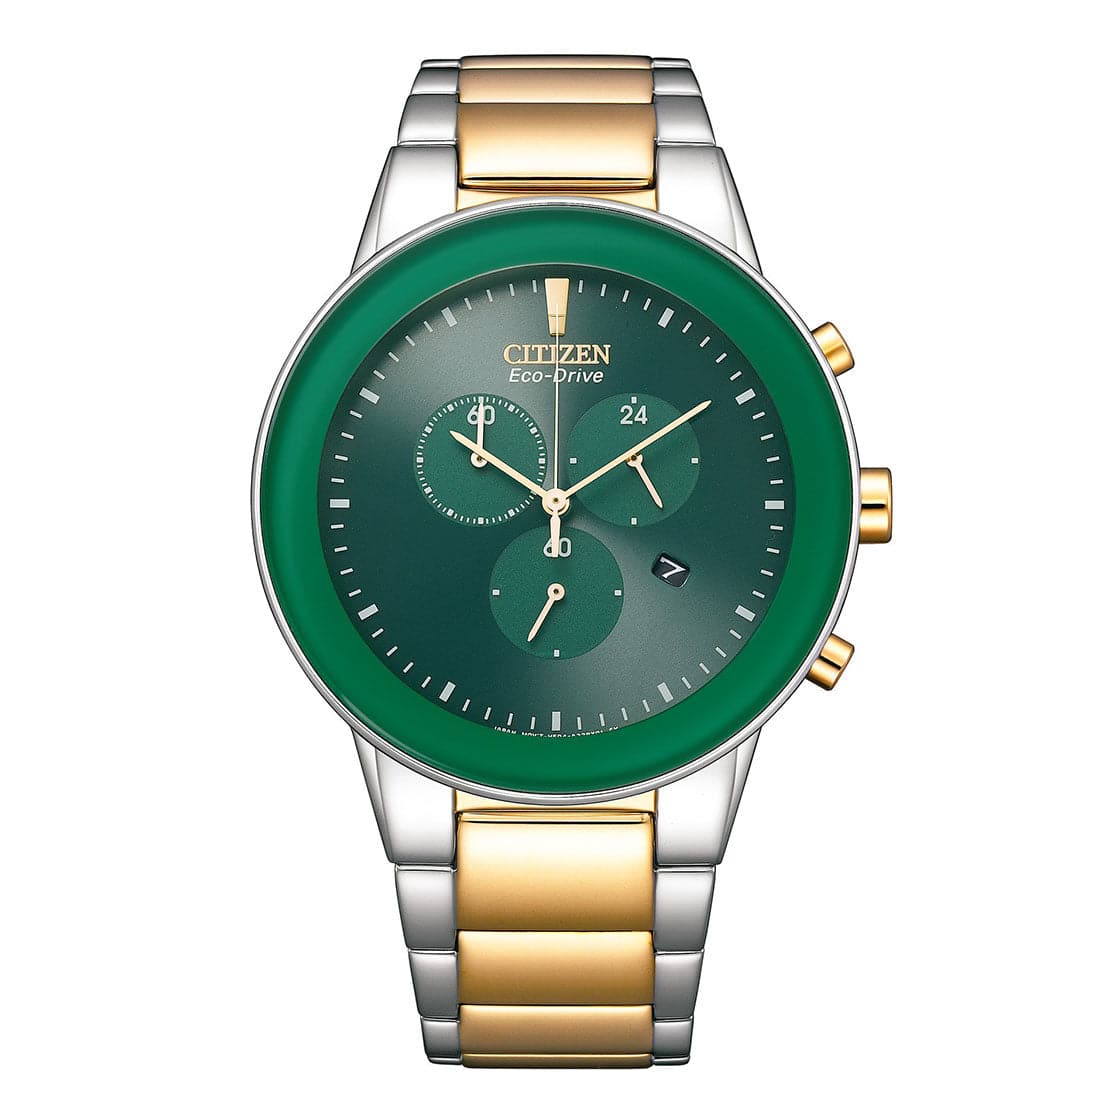 CITIZEN ECO-DRIVE GENTS WATCH GREEN DIAL - AT2244-84X - Kamal Watch Company